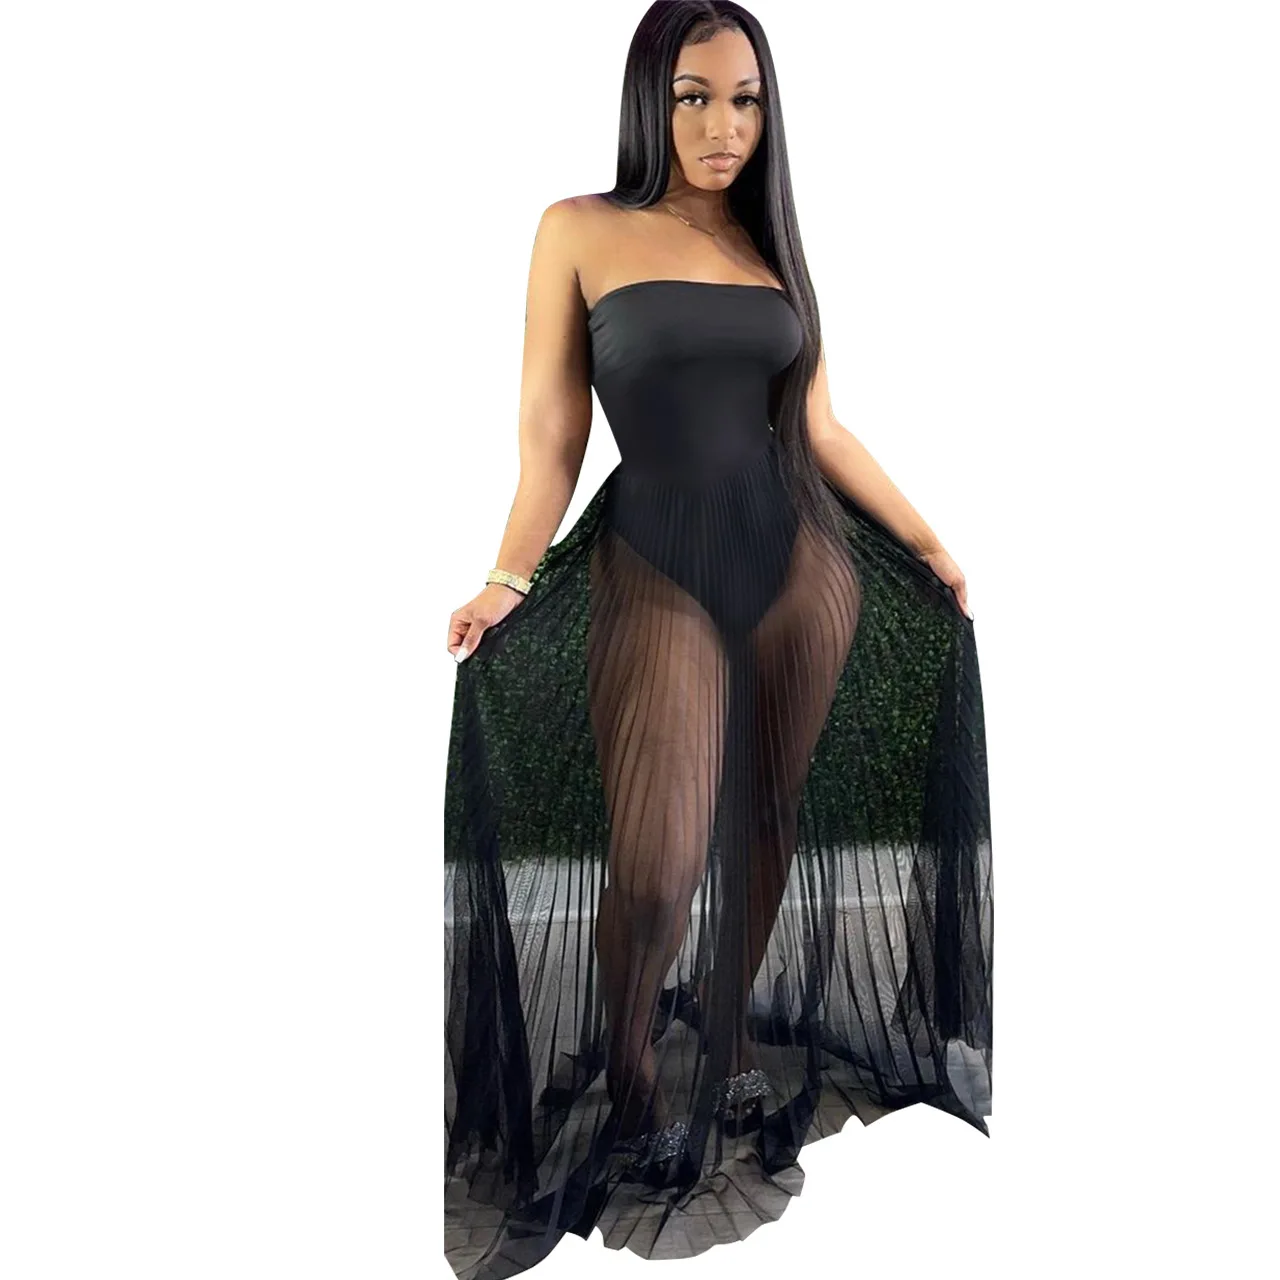 Cover Up Swimsuit Women Dress Bathing Suit Pleated Mesh Patchwork Bodysuit Summer New Solid Beach Sexy Swimwear Cover Up Vestido bikini cover up dress Cover-Ups